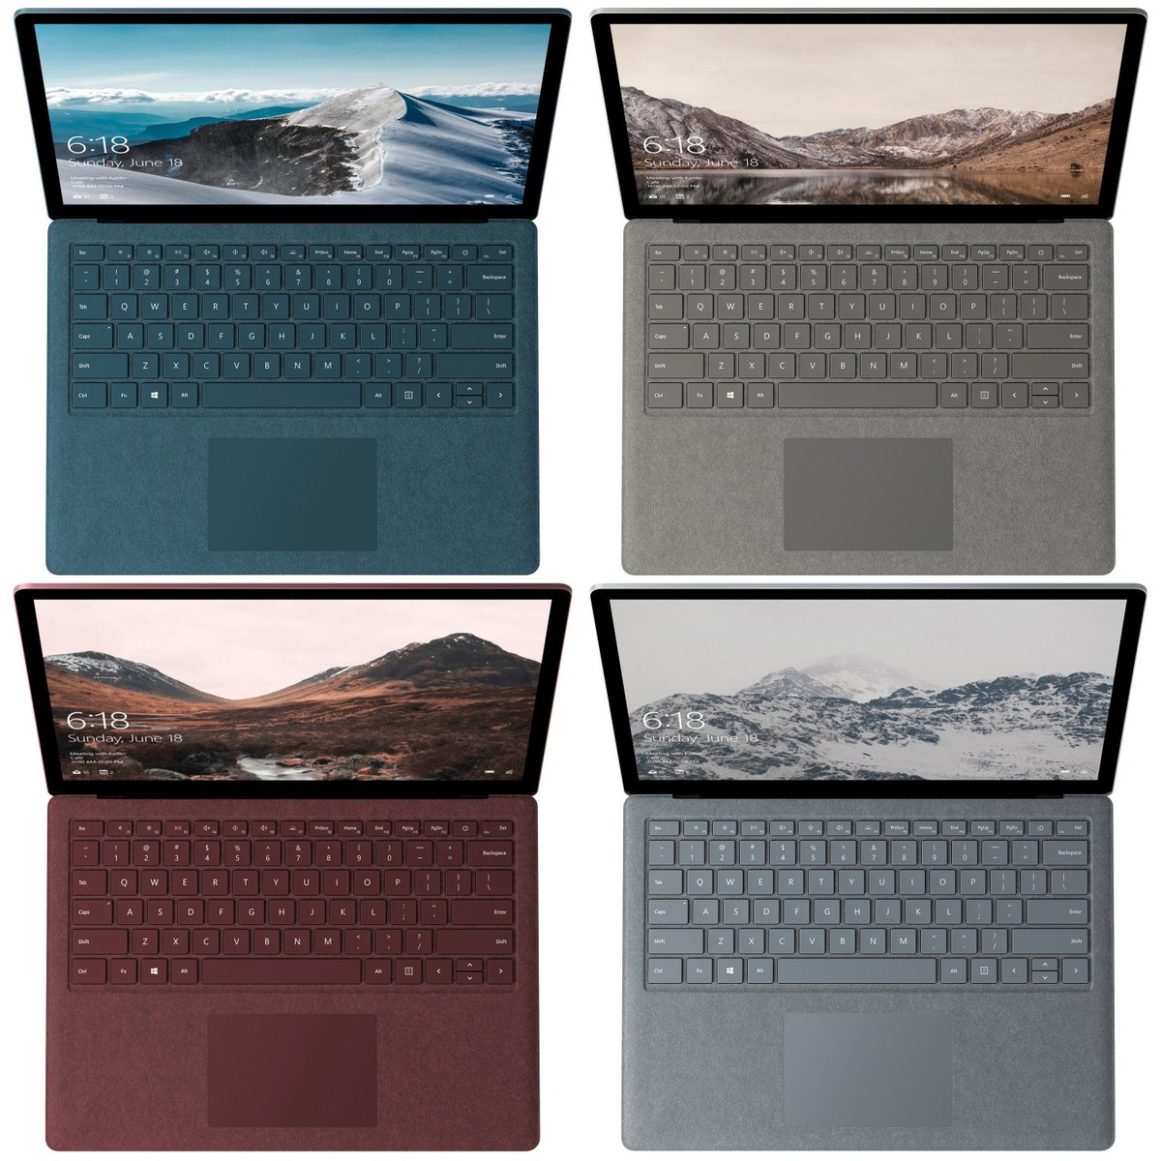 microsoft s surface laptop could have a premium price more images leak 515331 5